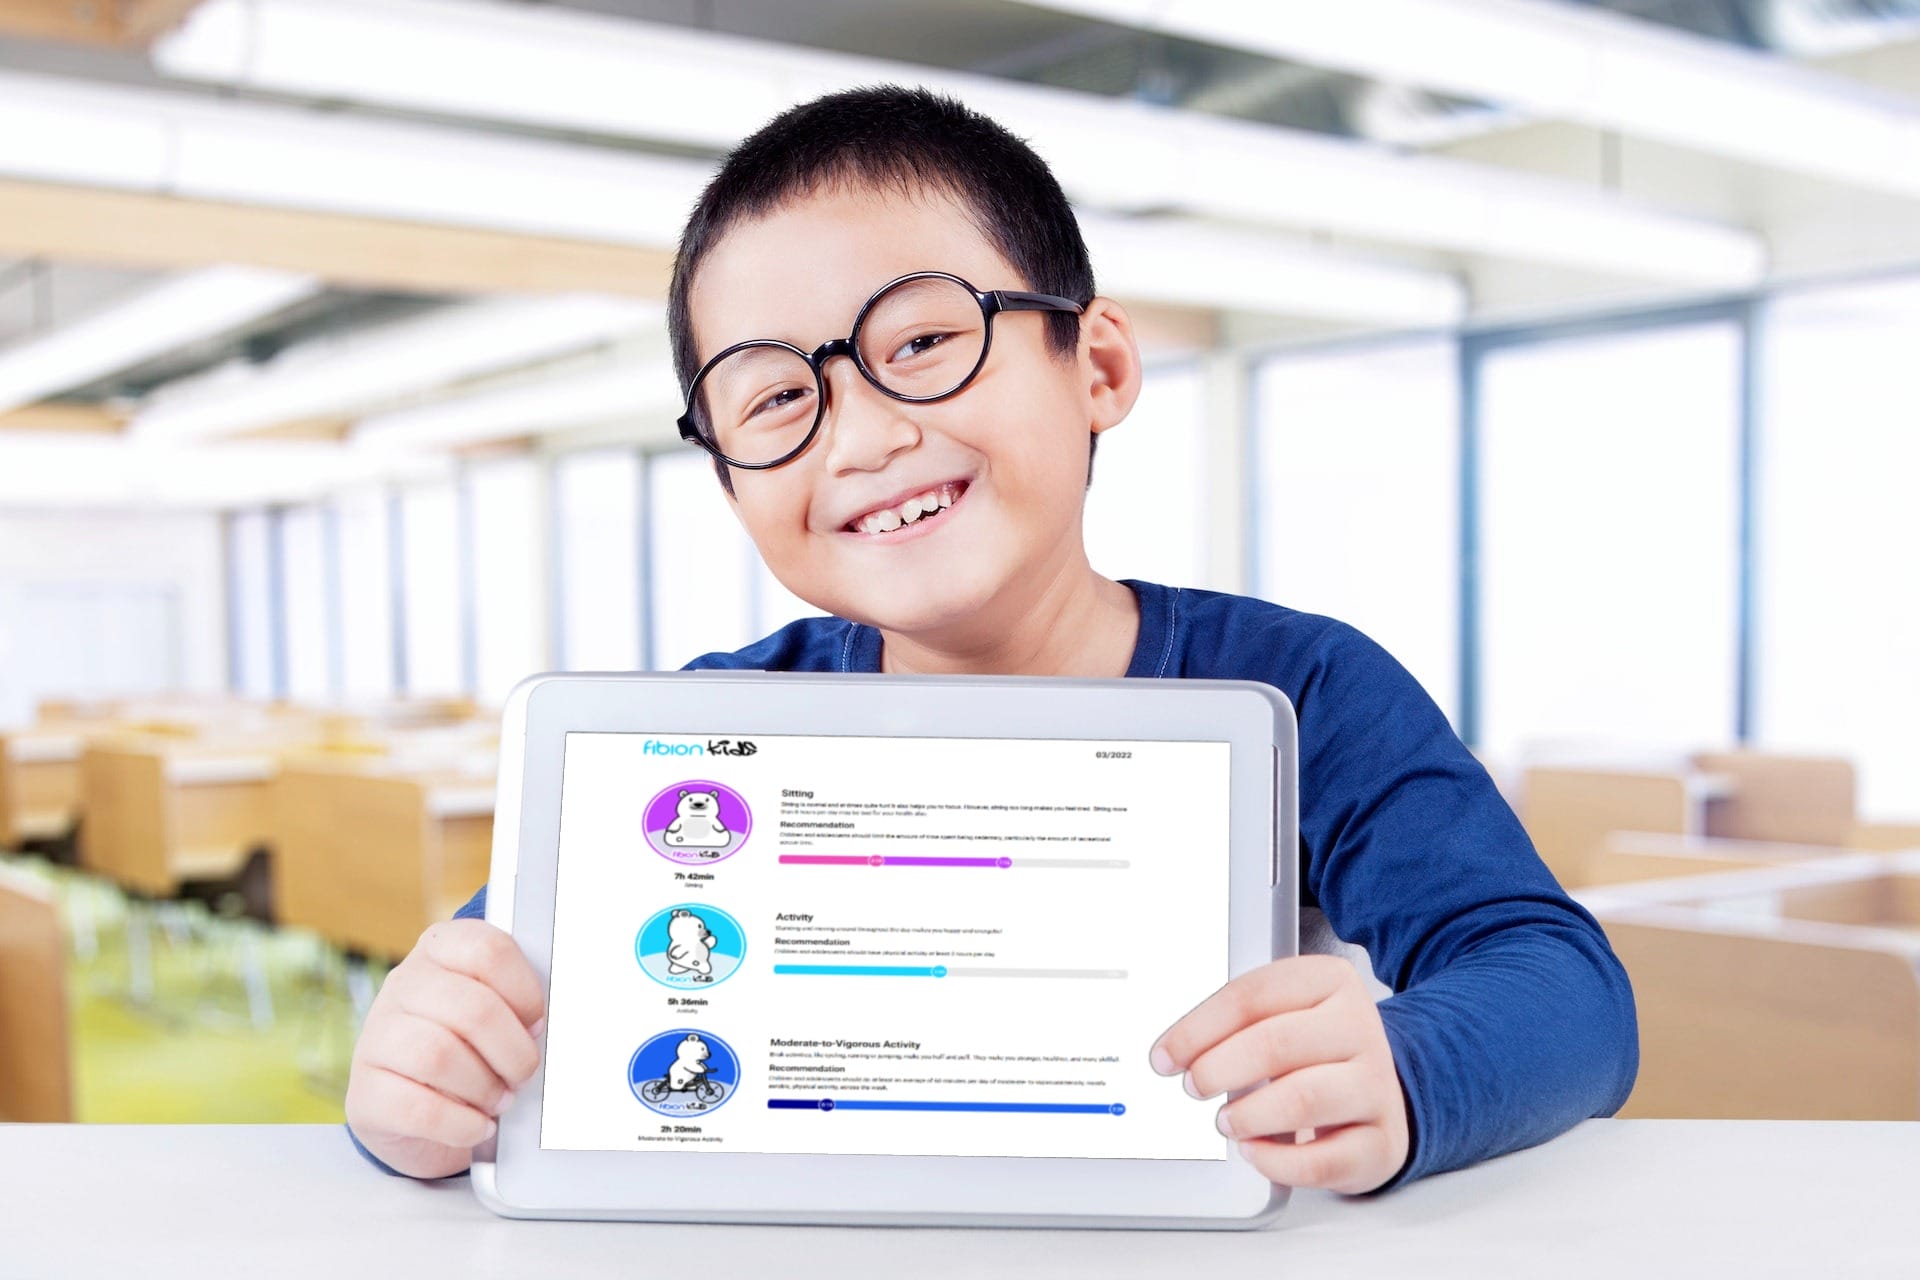 A smiling child with glasses holding a tablet displaying the Fibion Kids educational app in a classroom setting.